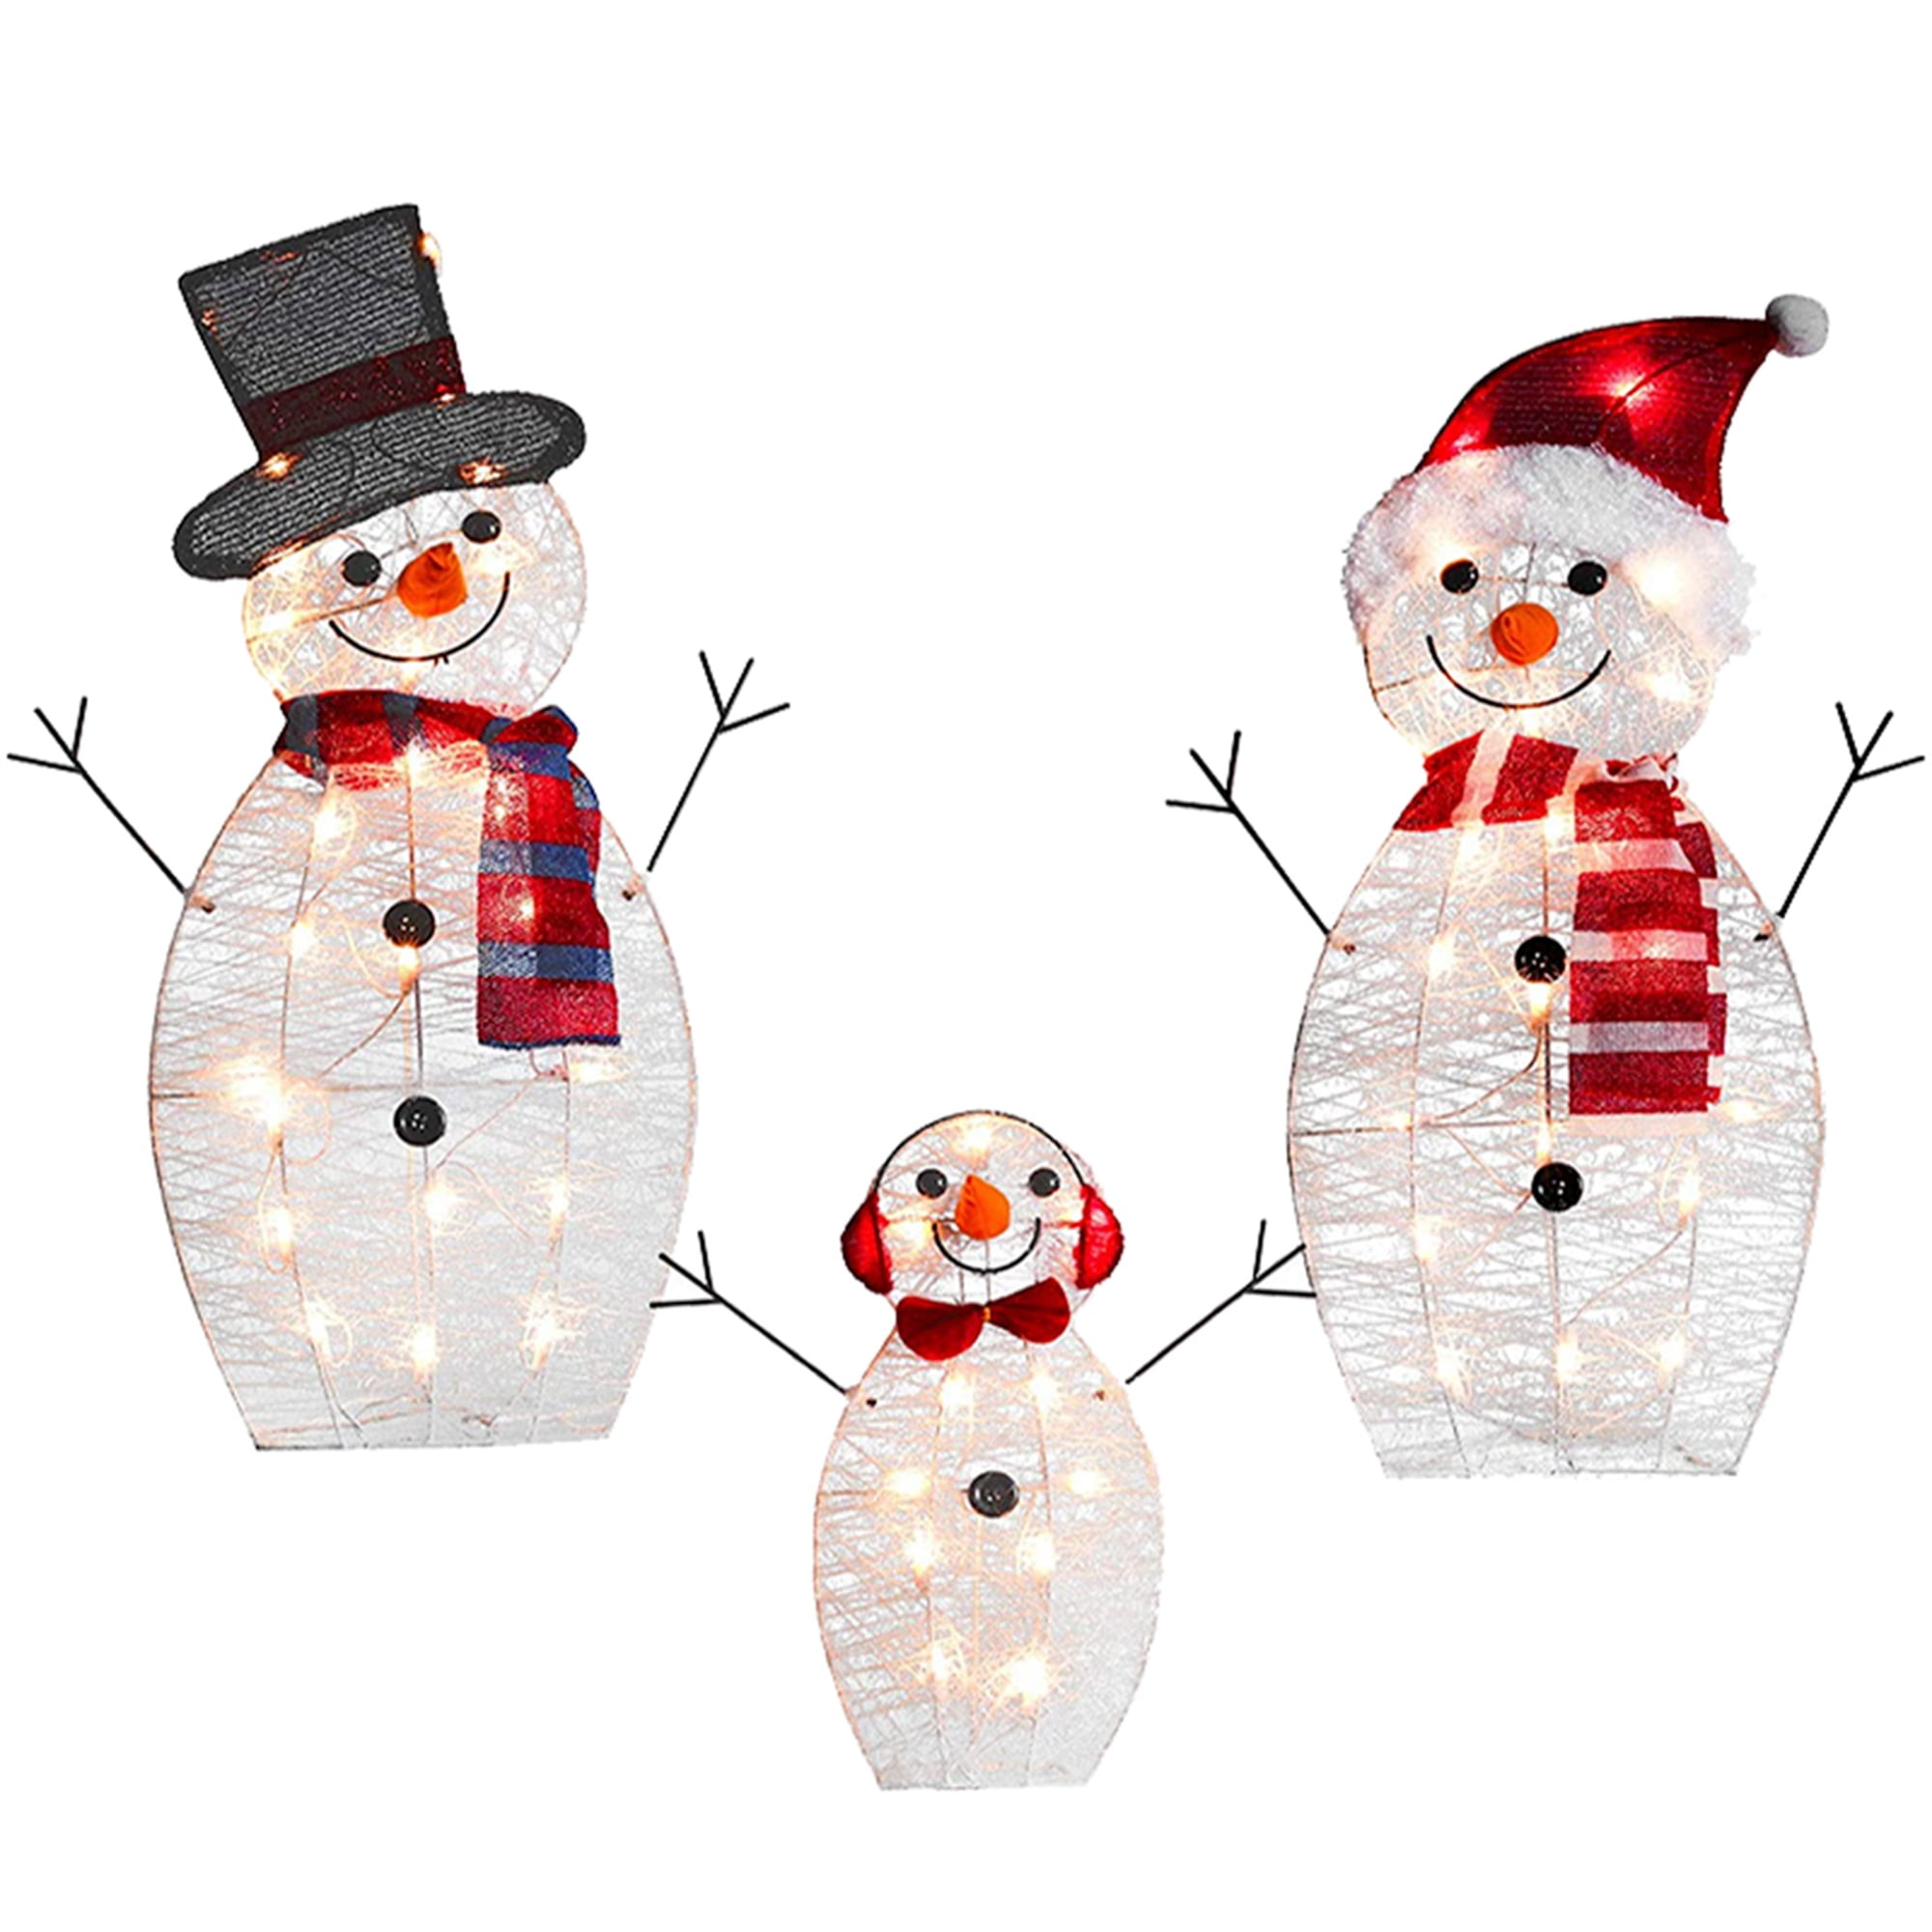 3ft Lighted Snowman Pre-Lit LED Christmas Holiday Decoration Inc Lights4fun 